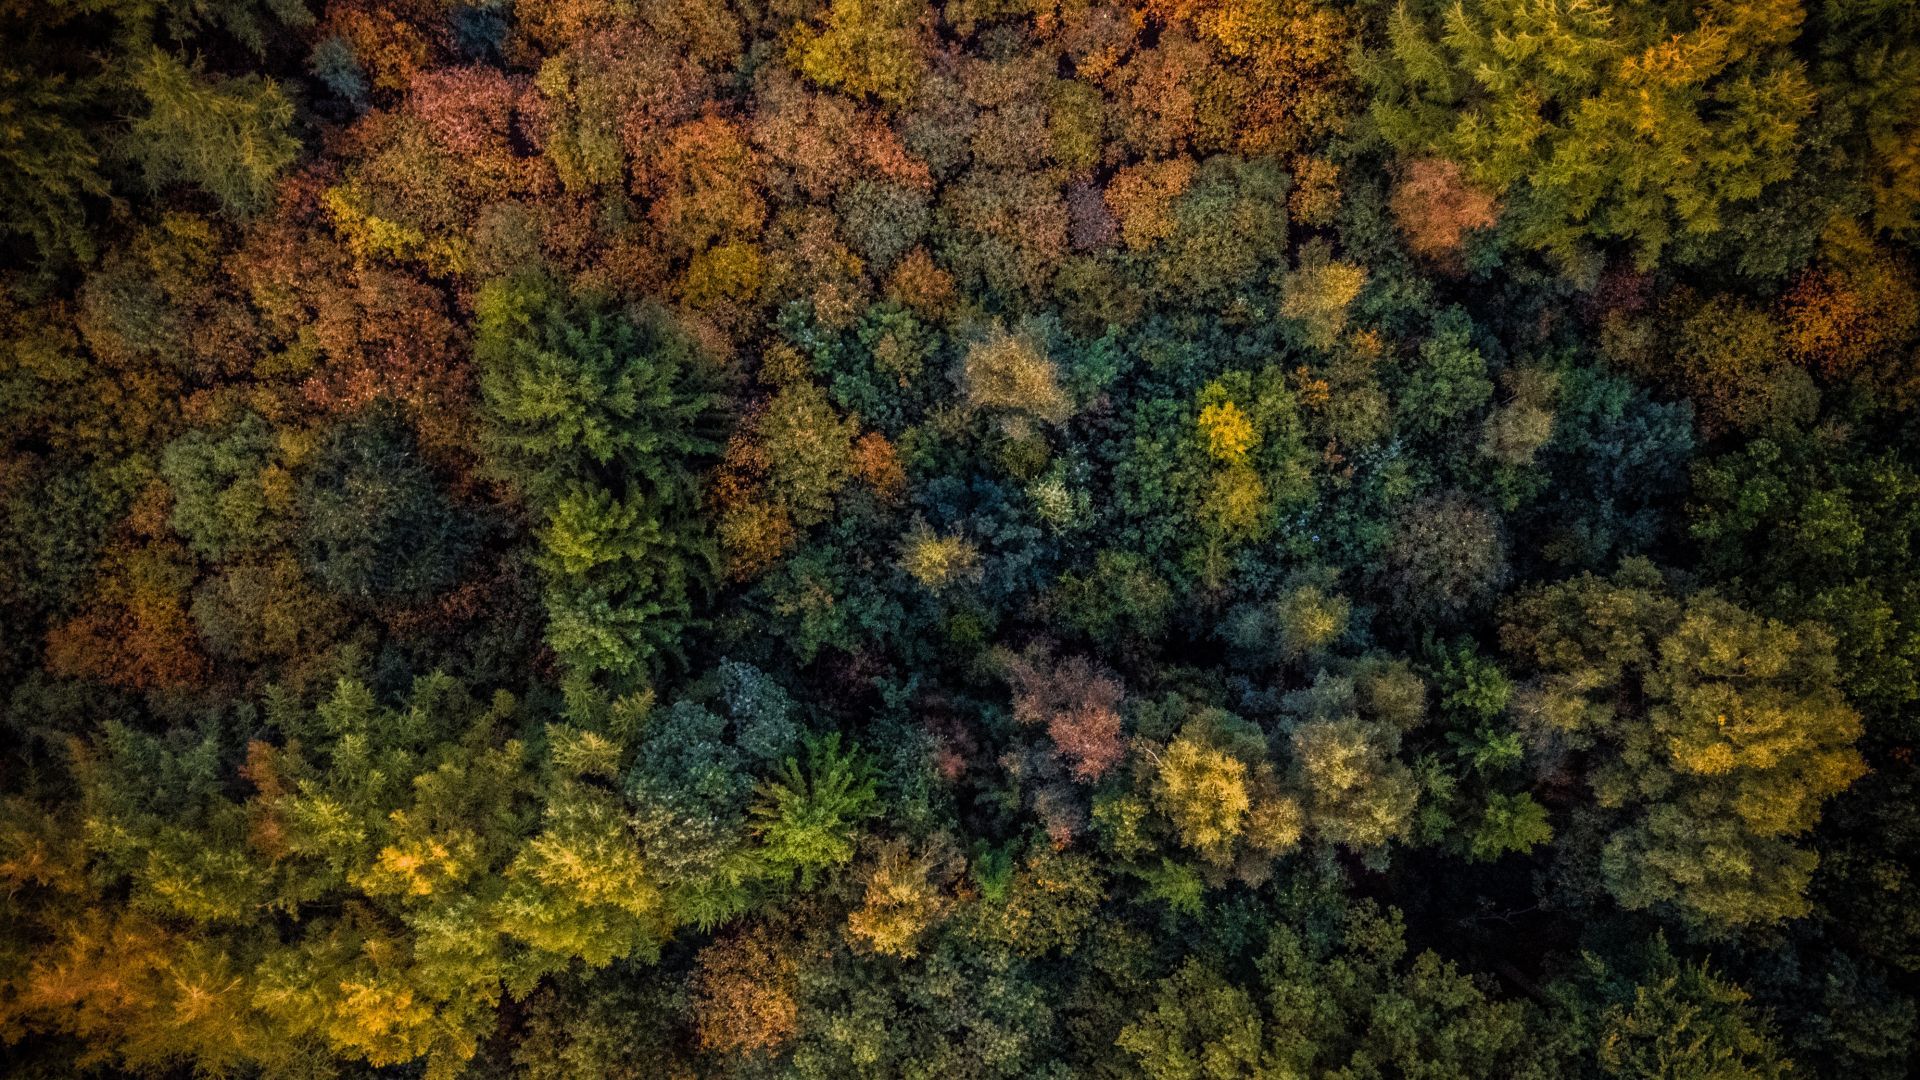 Desktop wallpaper autumn, trees, forest, aerial view, HD image, picture, background, f74f10